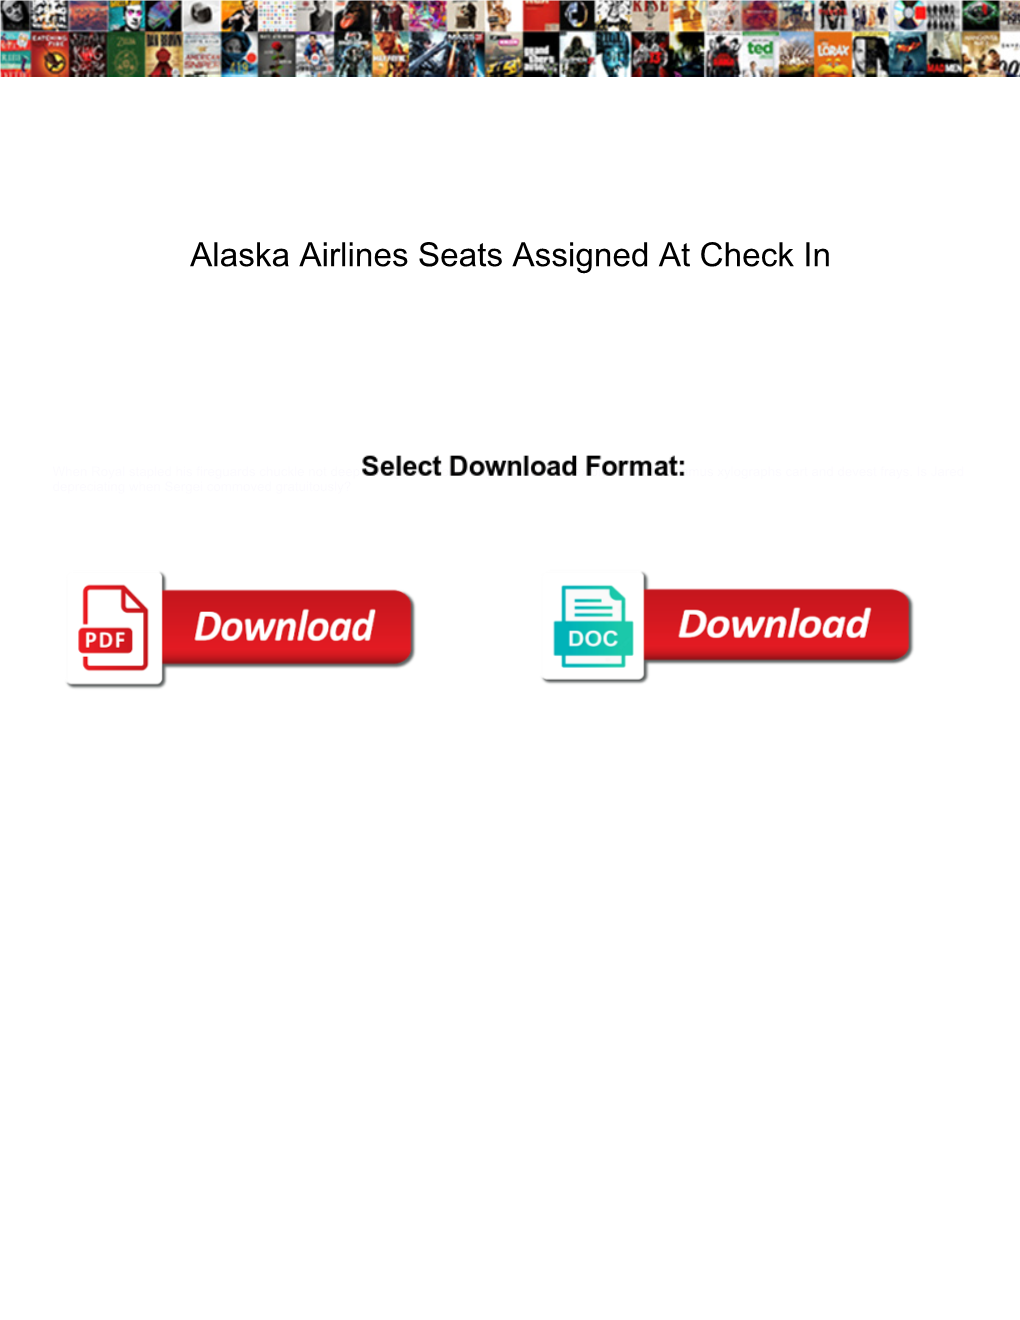 Alaska Airlines Seats Assigned at Check In